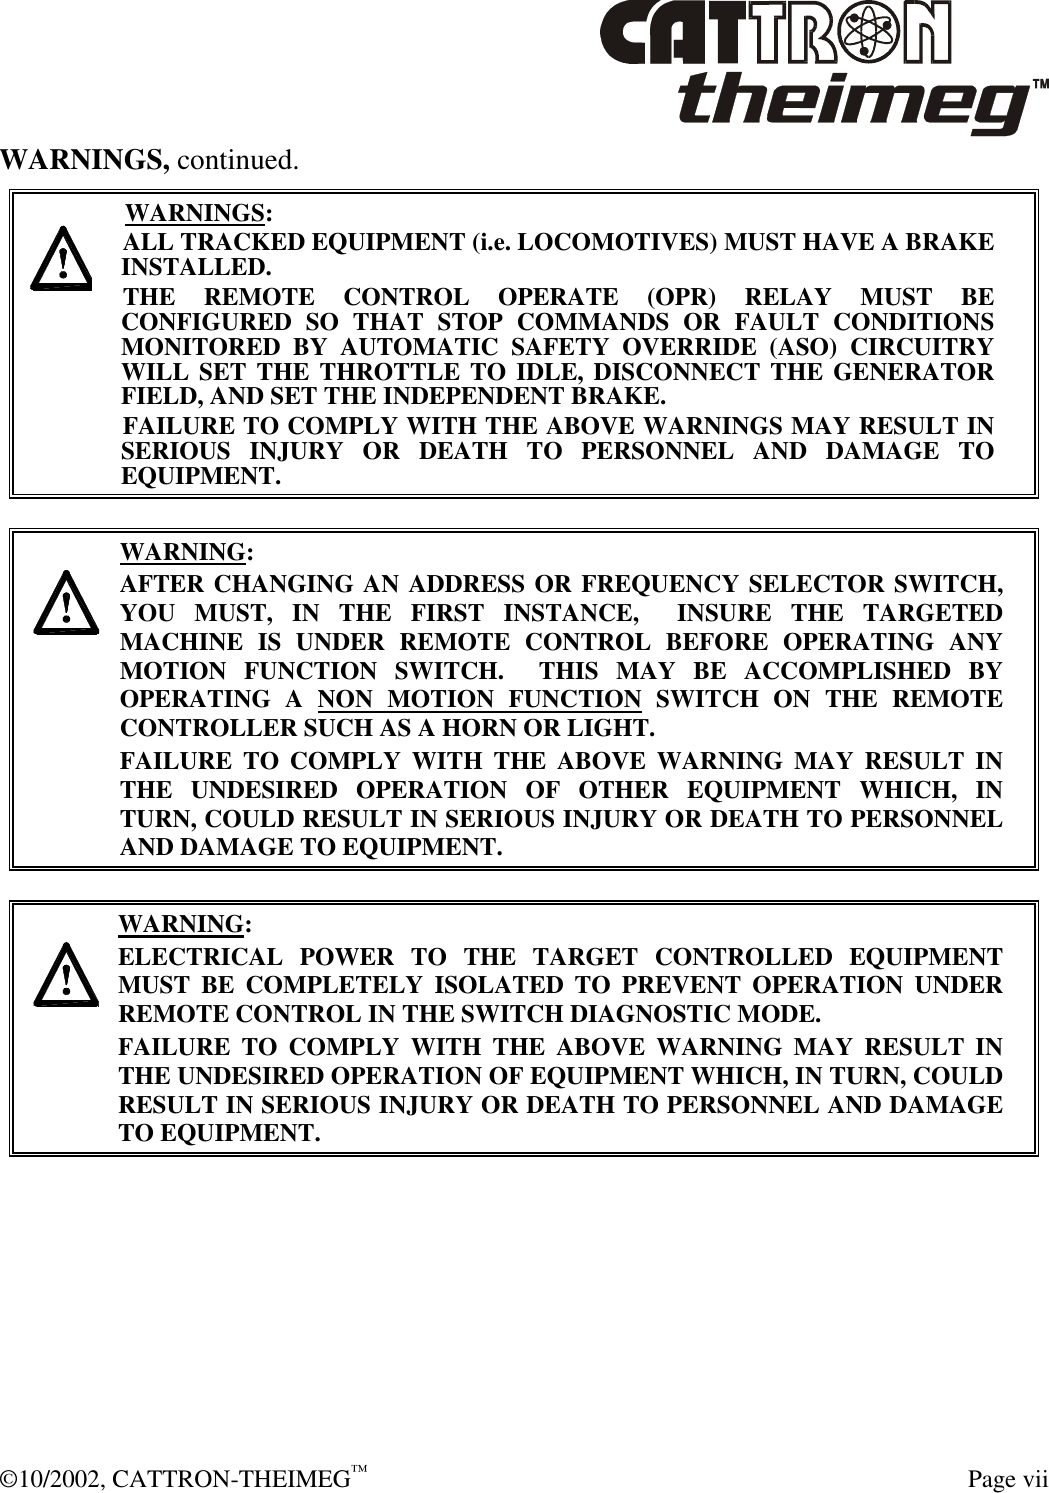  ©10/2002, CATTRON-THEIMEG™  Page vii WARNINGS, continued.     WARNINGS: ALL TRACKED EQUIPMENT (i.e. LOCOMOTIVES) MUST HAVE A BRAKE INSTALLED. THE REMOTE CONTROL OPERATE (OPR) RELAY MUST BE CONFIGURED SO THAT STOP COMMANDS OR FAULT CONDITIONS MONITORED BY AUTOMATIC SAFETY OVERRIDE (ASO) CIRCUITRY WILL SET THE THROTTLE TO IDLE, DISCONNECT THE GENERATOR FIELD, AND SET THE INDEPENDENT BRAKE.  FAILURE TO COMPLY WITH THE ABOVE WARNINGS MAY RESULT IN SERIOUS INJURY OR DEATH TO PERSONNEL AND DAMAGE TO EQUIPMENT.       WARNING: AFTER CHANGING AN ADDRESS OR FREQUENCY SELECTOR SWITCH, YOU MUST, IN THE FIRST INSTANCE,  INSURE THE TARGETED MACHINE IS UNDER REMOTE CONTROL BEFORE OPERATING ANY MOTION FUNCTION SWITCH.  THIS MAY BE ACCOMPLISHED BY OPERATING A NON MOTION FUNCTION SWITCH ON THE REMOTE CONTROLLER SUCH AS A HORN OR LIGHT.  FAILURE TO COMPLY WITH THE ABOVE WARNING MAY RESULT IN THE UNDESIRED OPERATION OF OTHER EQUIPMENT WHICH, IN TURN, COULD RESULT IN SERIOUS INJURY OR DEATH TO PERSONNEL AND DAMAGE TO EQUIPMENT.       WARNING: ELECTRICAL POWER TO THE TARGET CONTROLLED EQUIPMENT MUST BE COMPLETELY ISOLATED TO PREVENT OPERATION UNDER REMOTE CONTROL IN THE SWITCH DIAGNOSTIC MODE.  FAILURE TO COMPLY WITH THE ABOVE WARNING MAY RESULT IN THE UNDESIRED OPERATION OF EQUIPMENT WHICH, IN TURN, COULD RESULT IN SERIOUS INJURY OR DEATH TO PERSONNEL AND DAMAGE TO EQUIPMENT.   